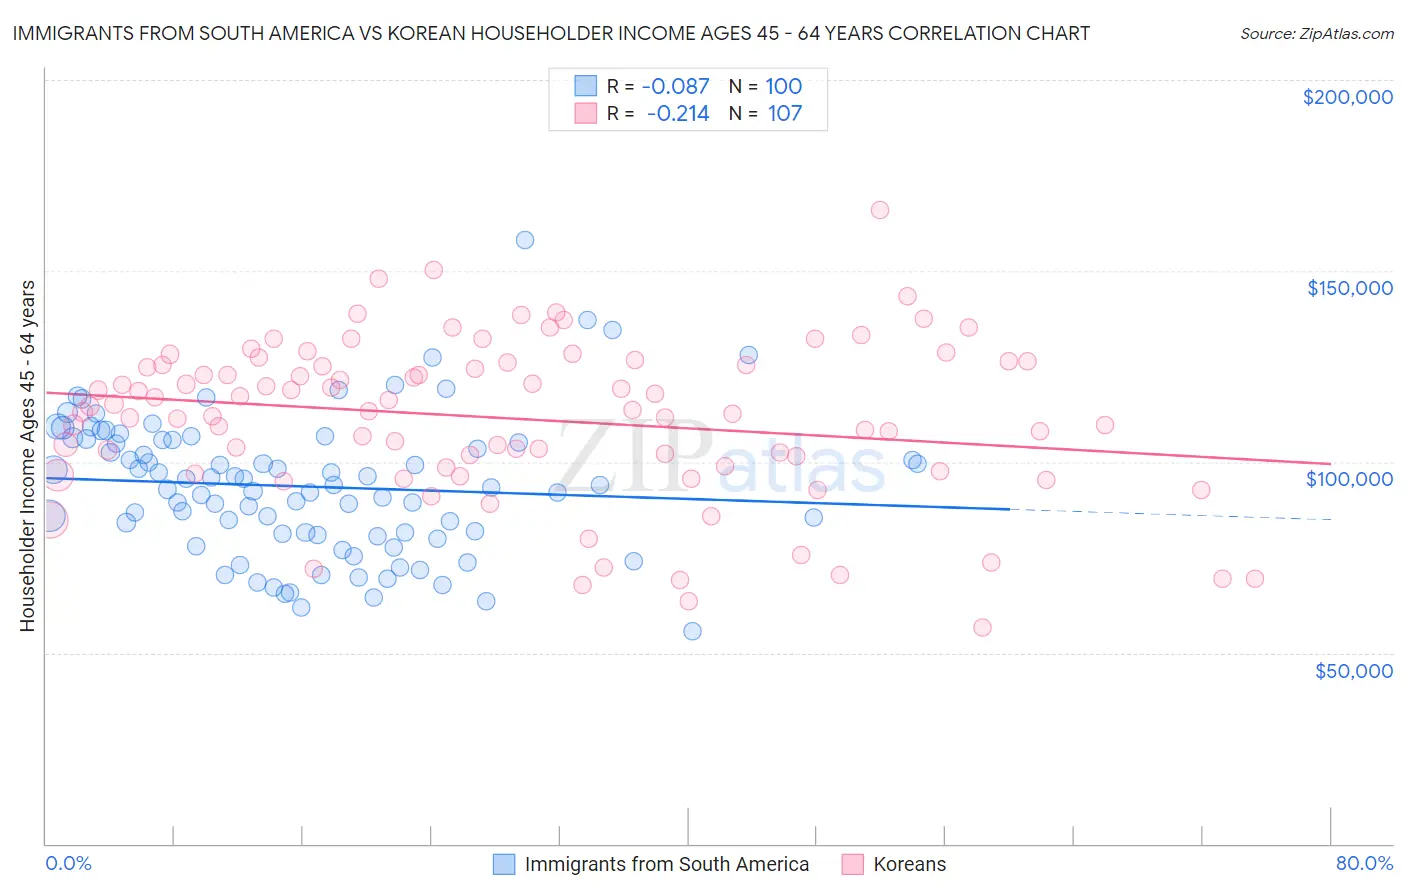 Immigrants from South America vs Korean Householder Income Ages 45 - 64 years